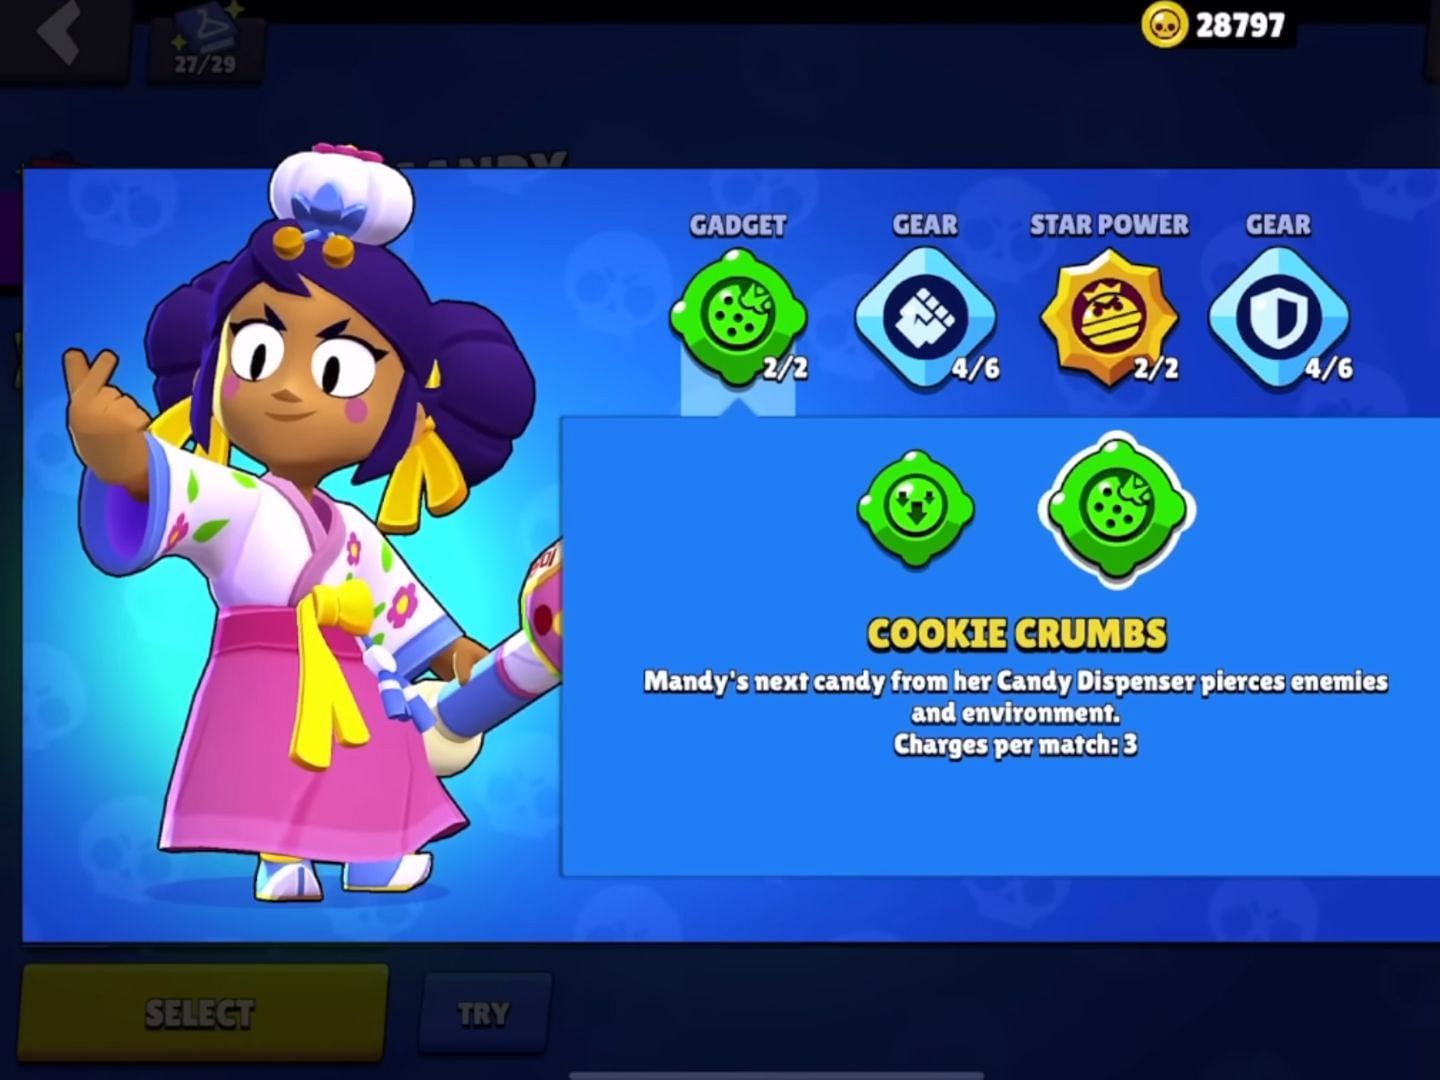 Cookie Crumbs Gadget (Image via Supercell)